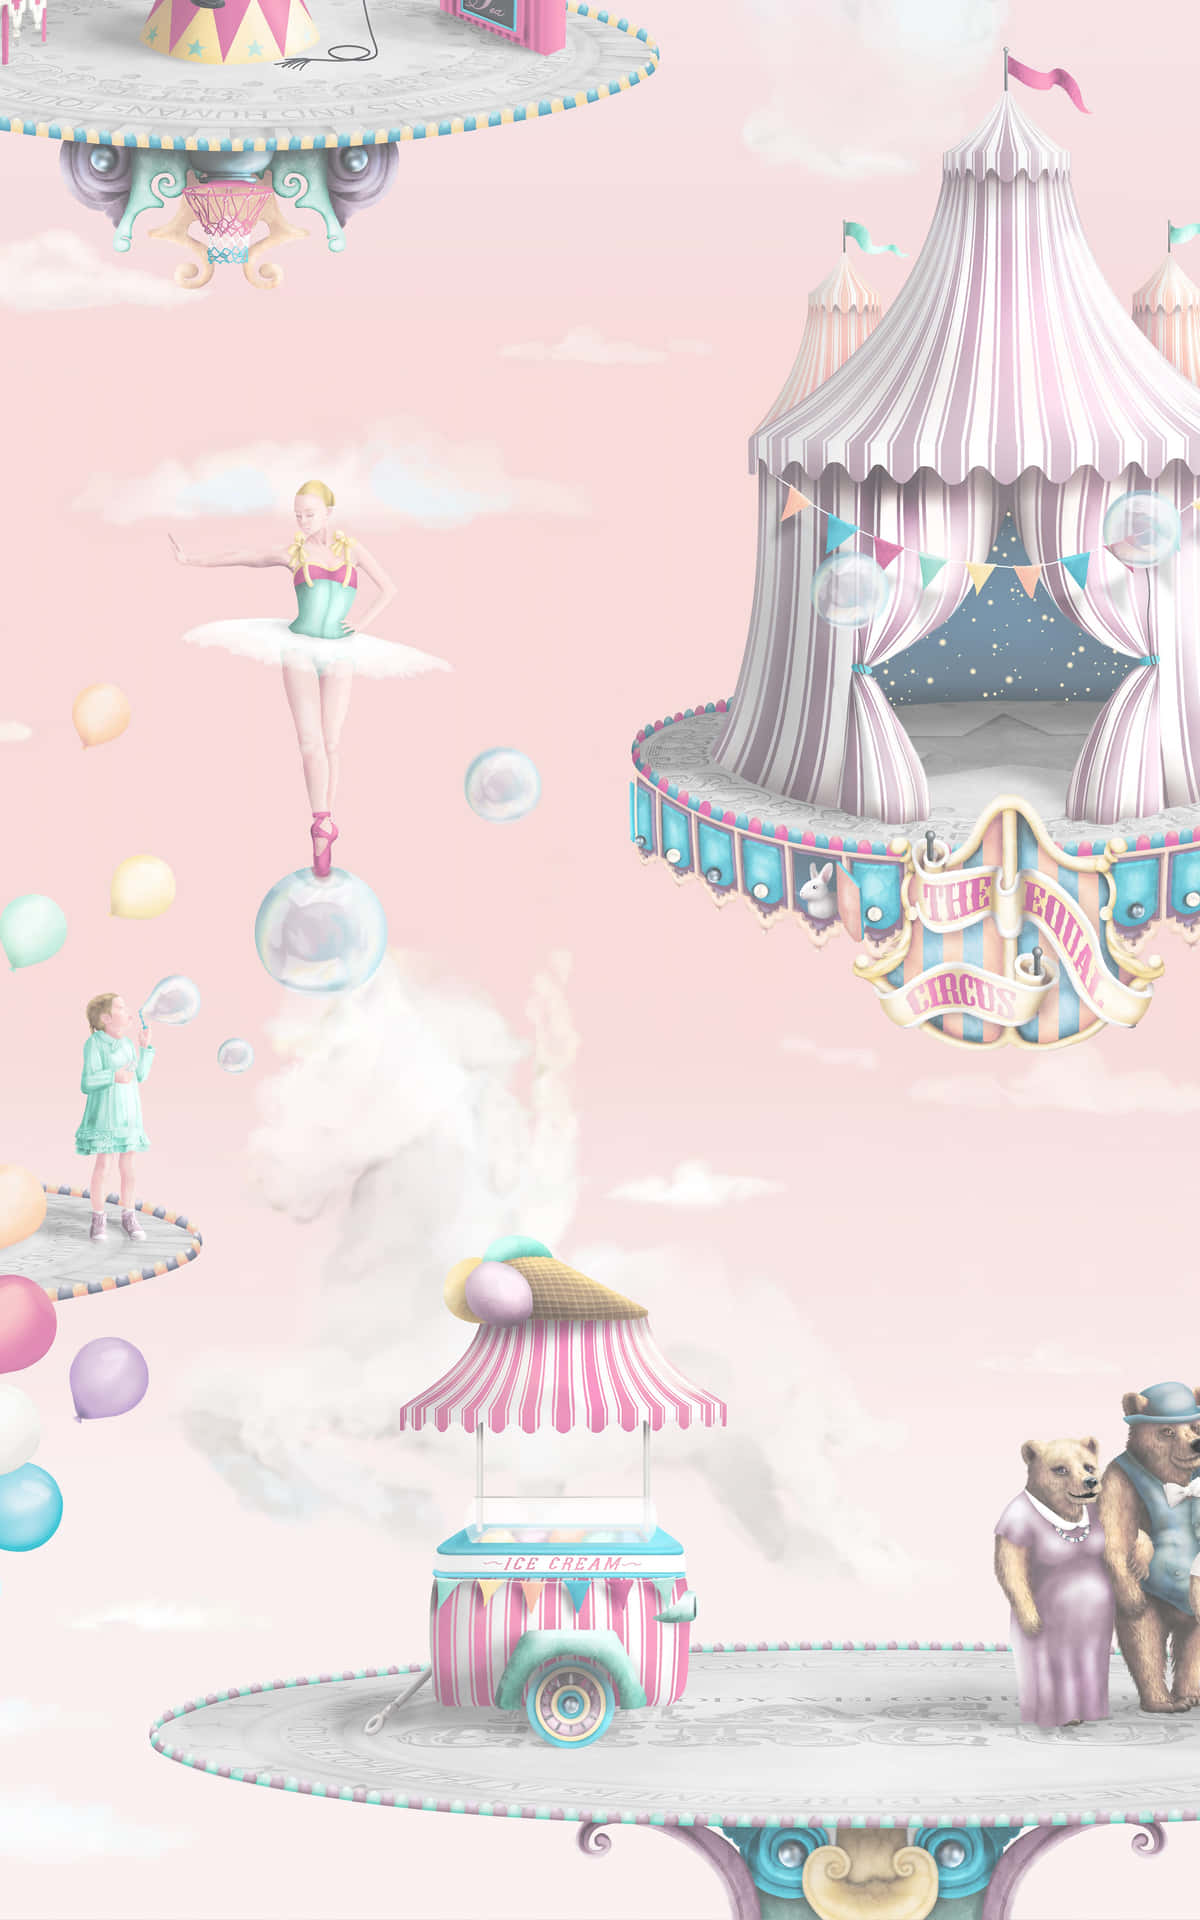 A Pink And White Circus Scene With Balloons And A Clown Wallpaper